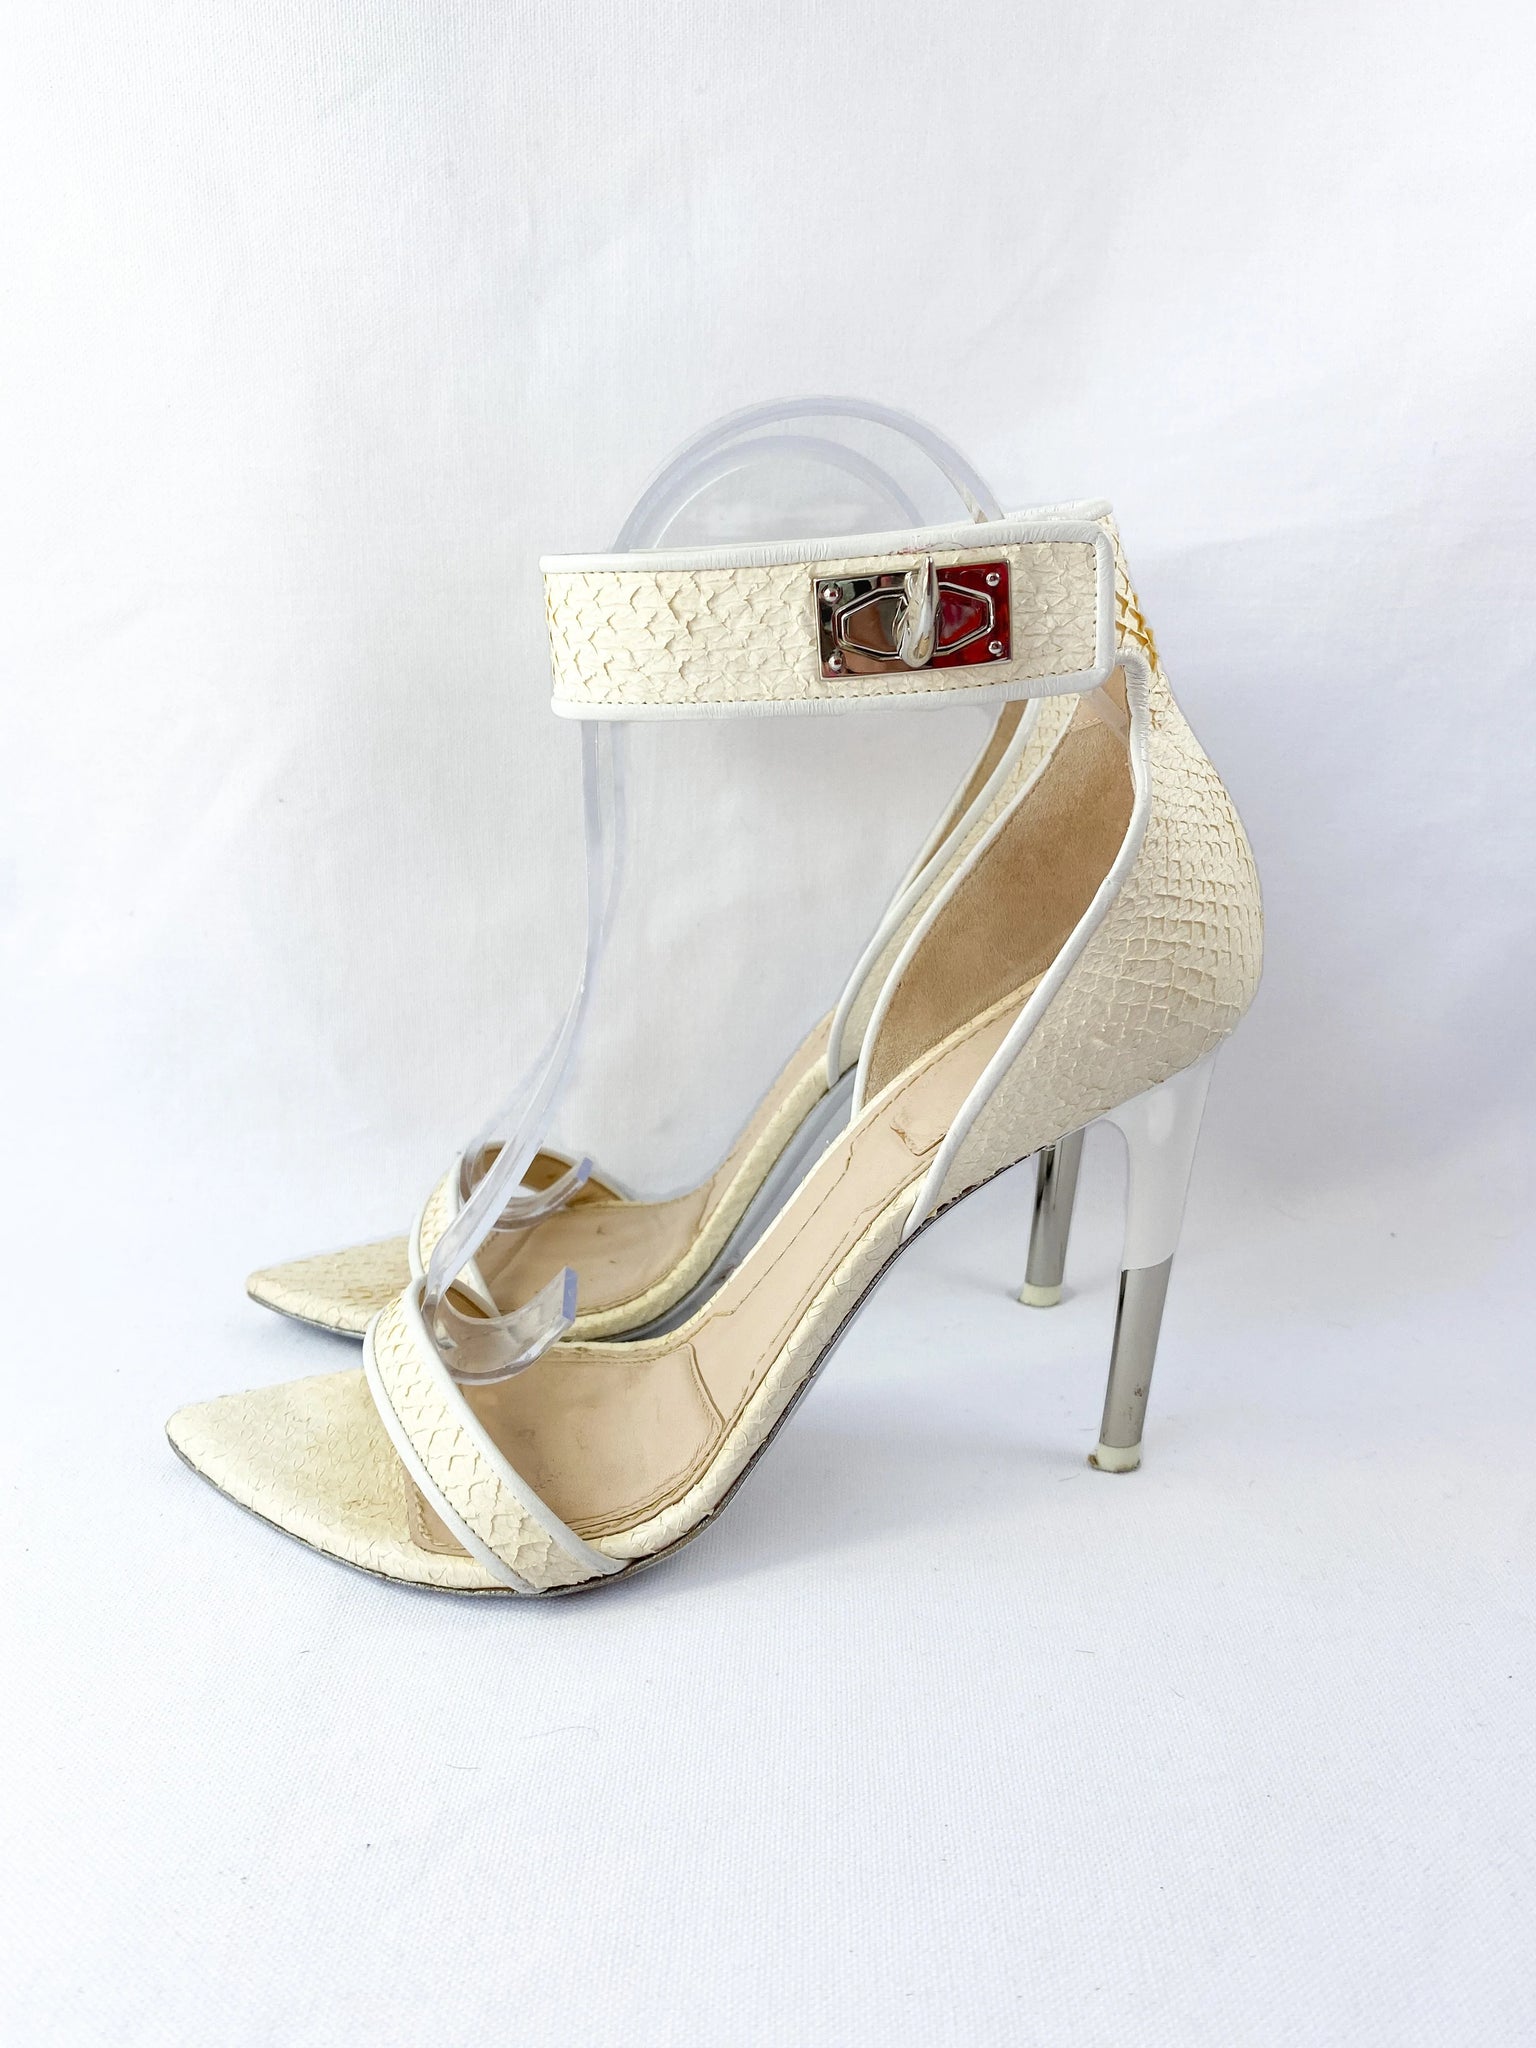 Givenchy cream python shark tooth pumps size 39.5 – My 